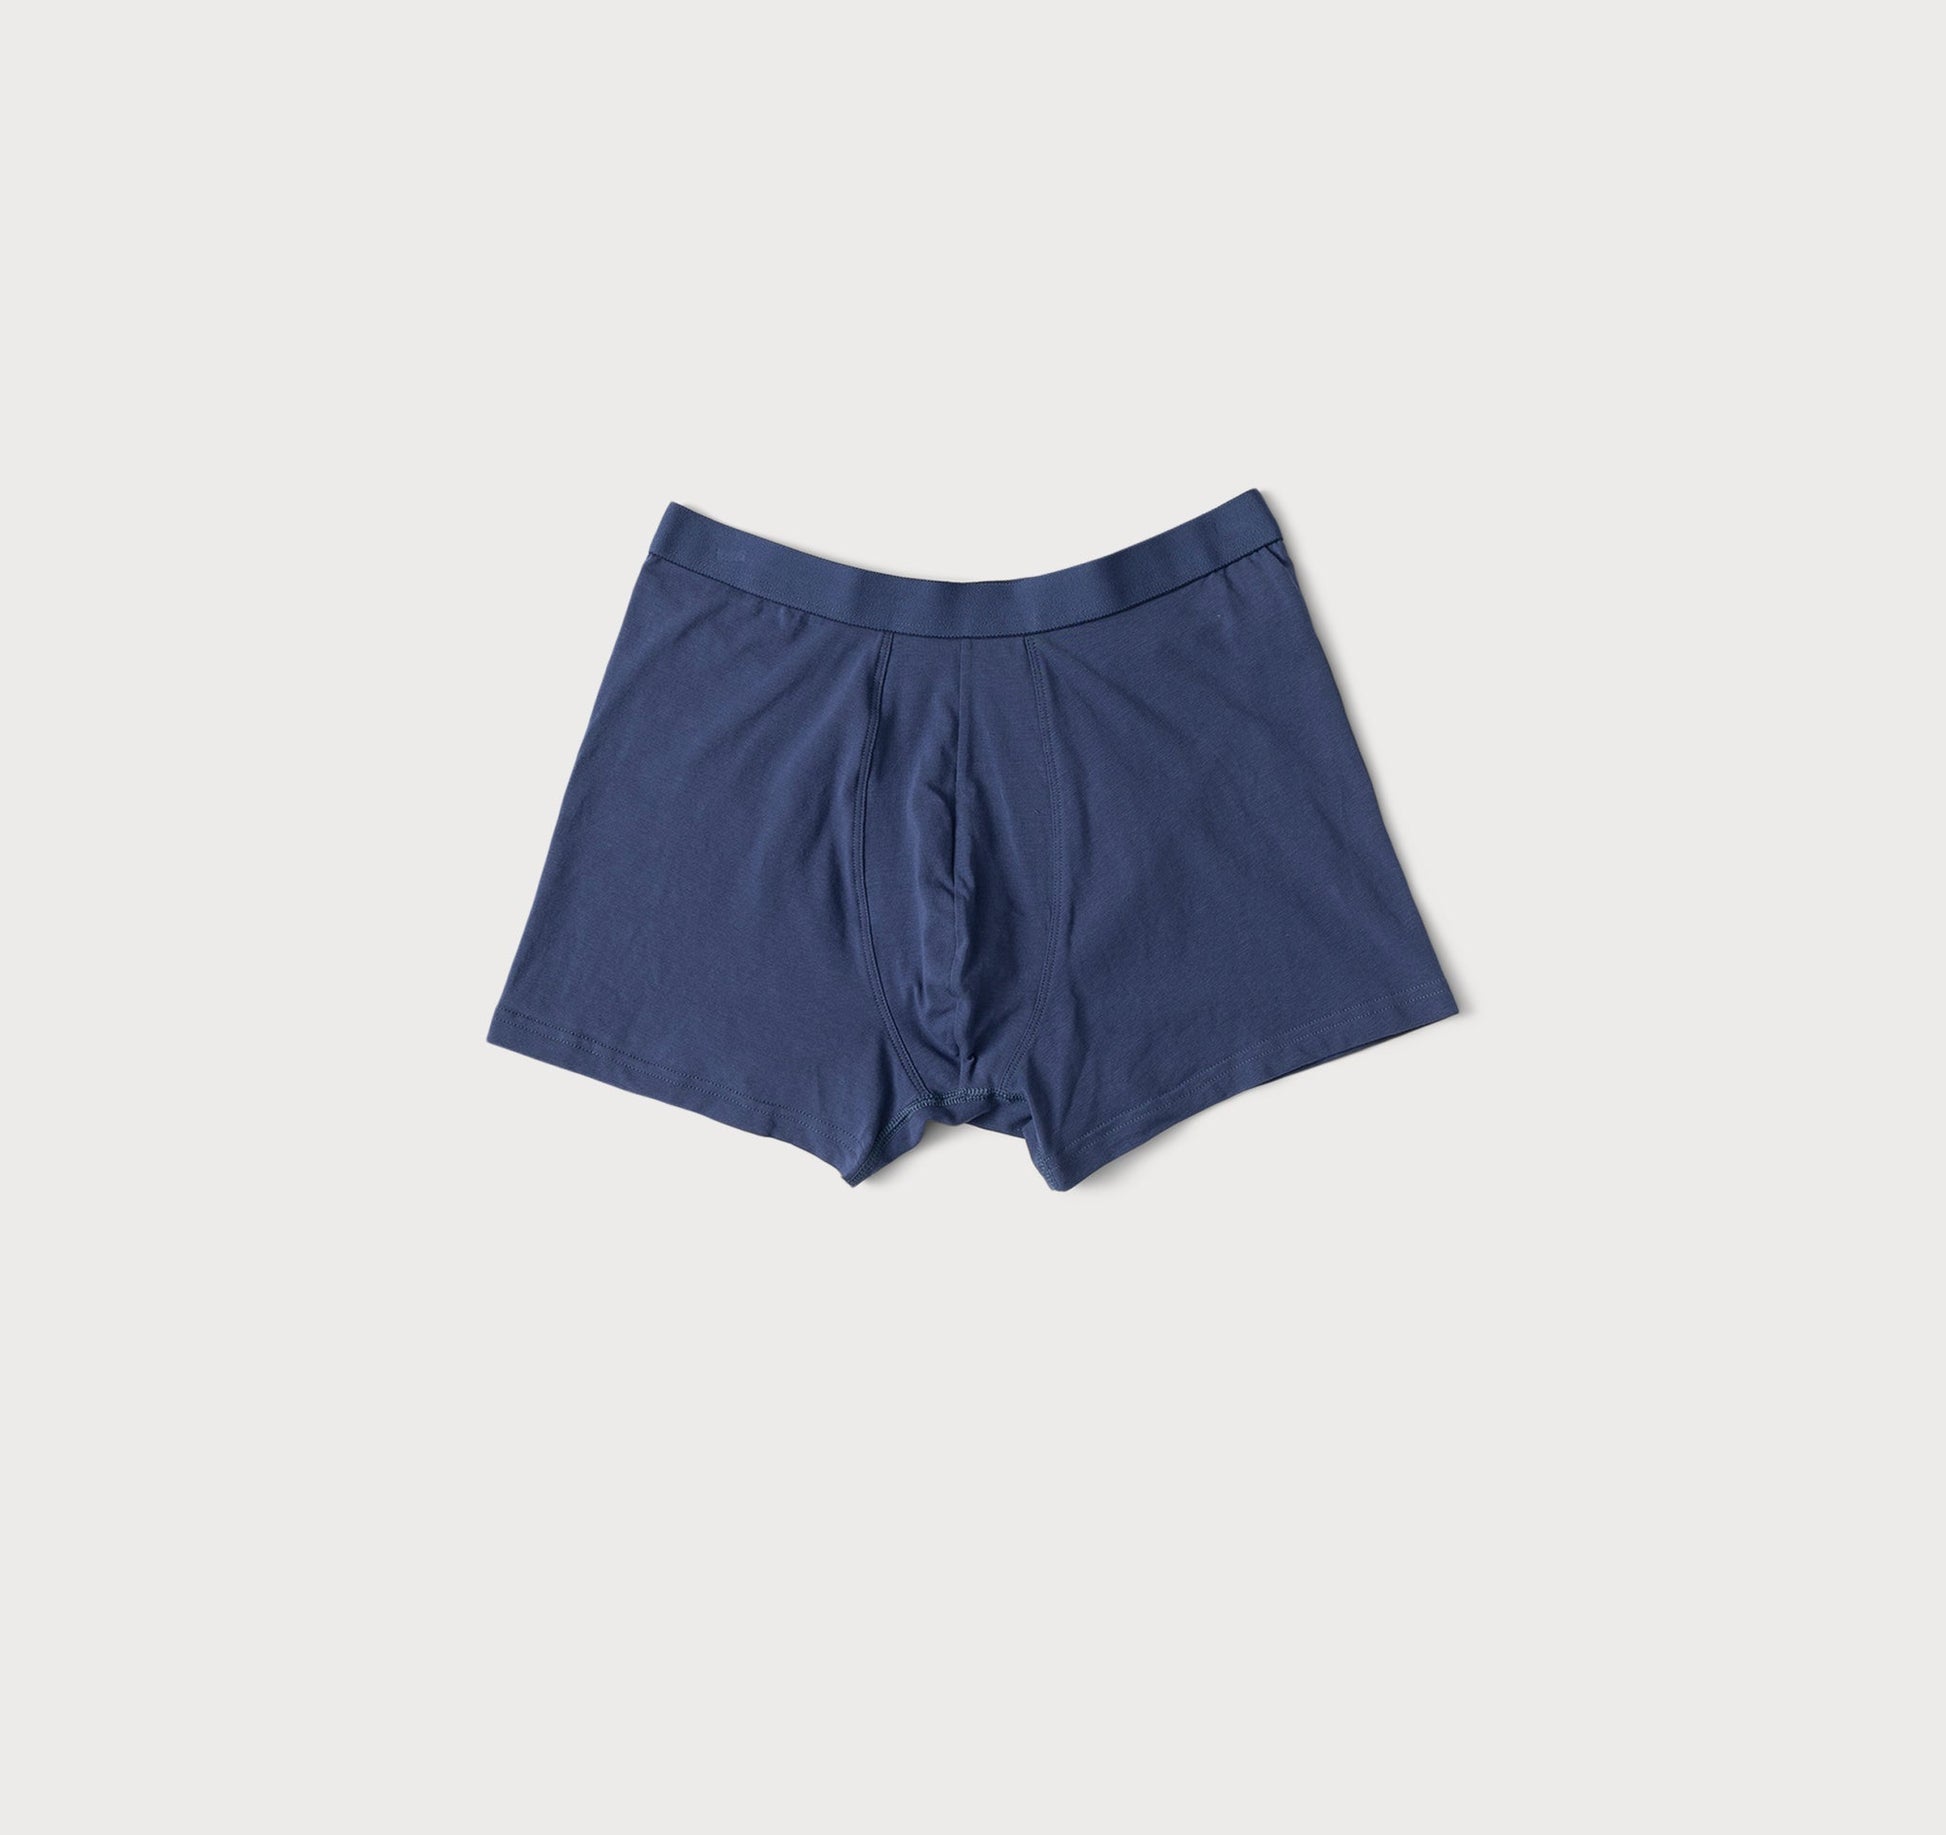 3 Pack Of Quality ZARA Boxer Shorts - Multicolour